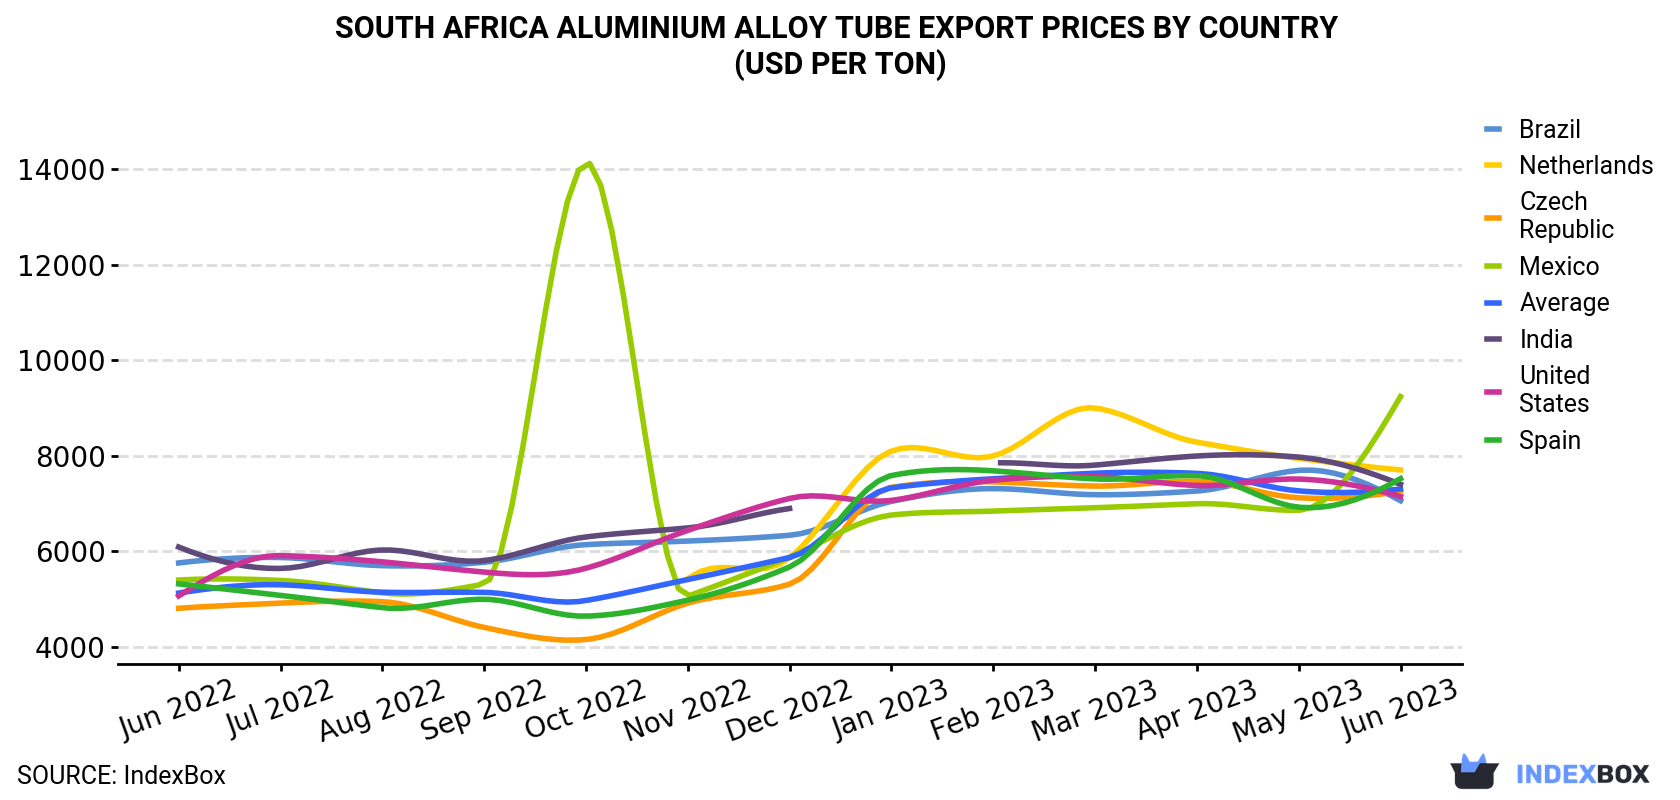 South Africa Aluminium Alloy Tube Export Prices By Country (USD Per Ton)